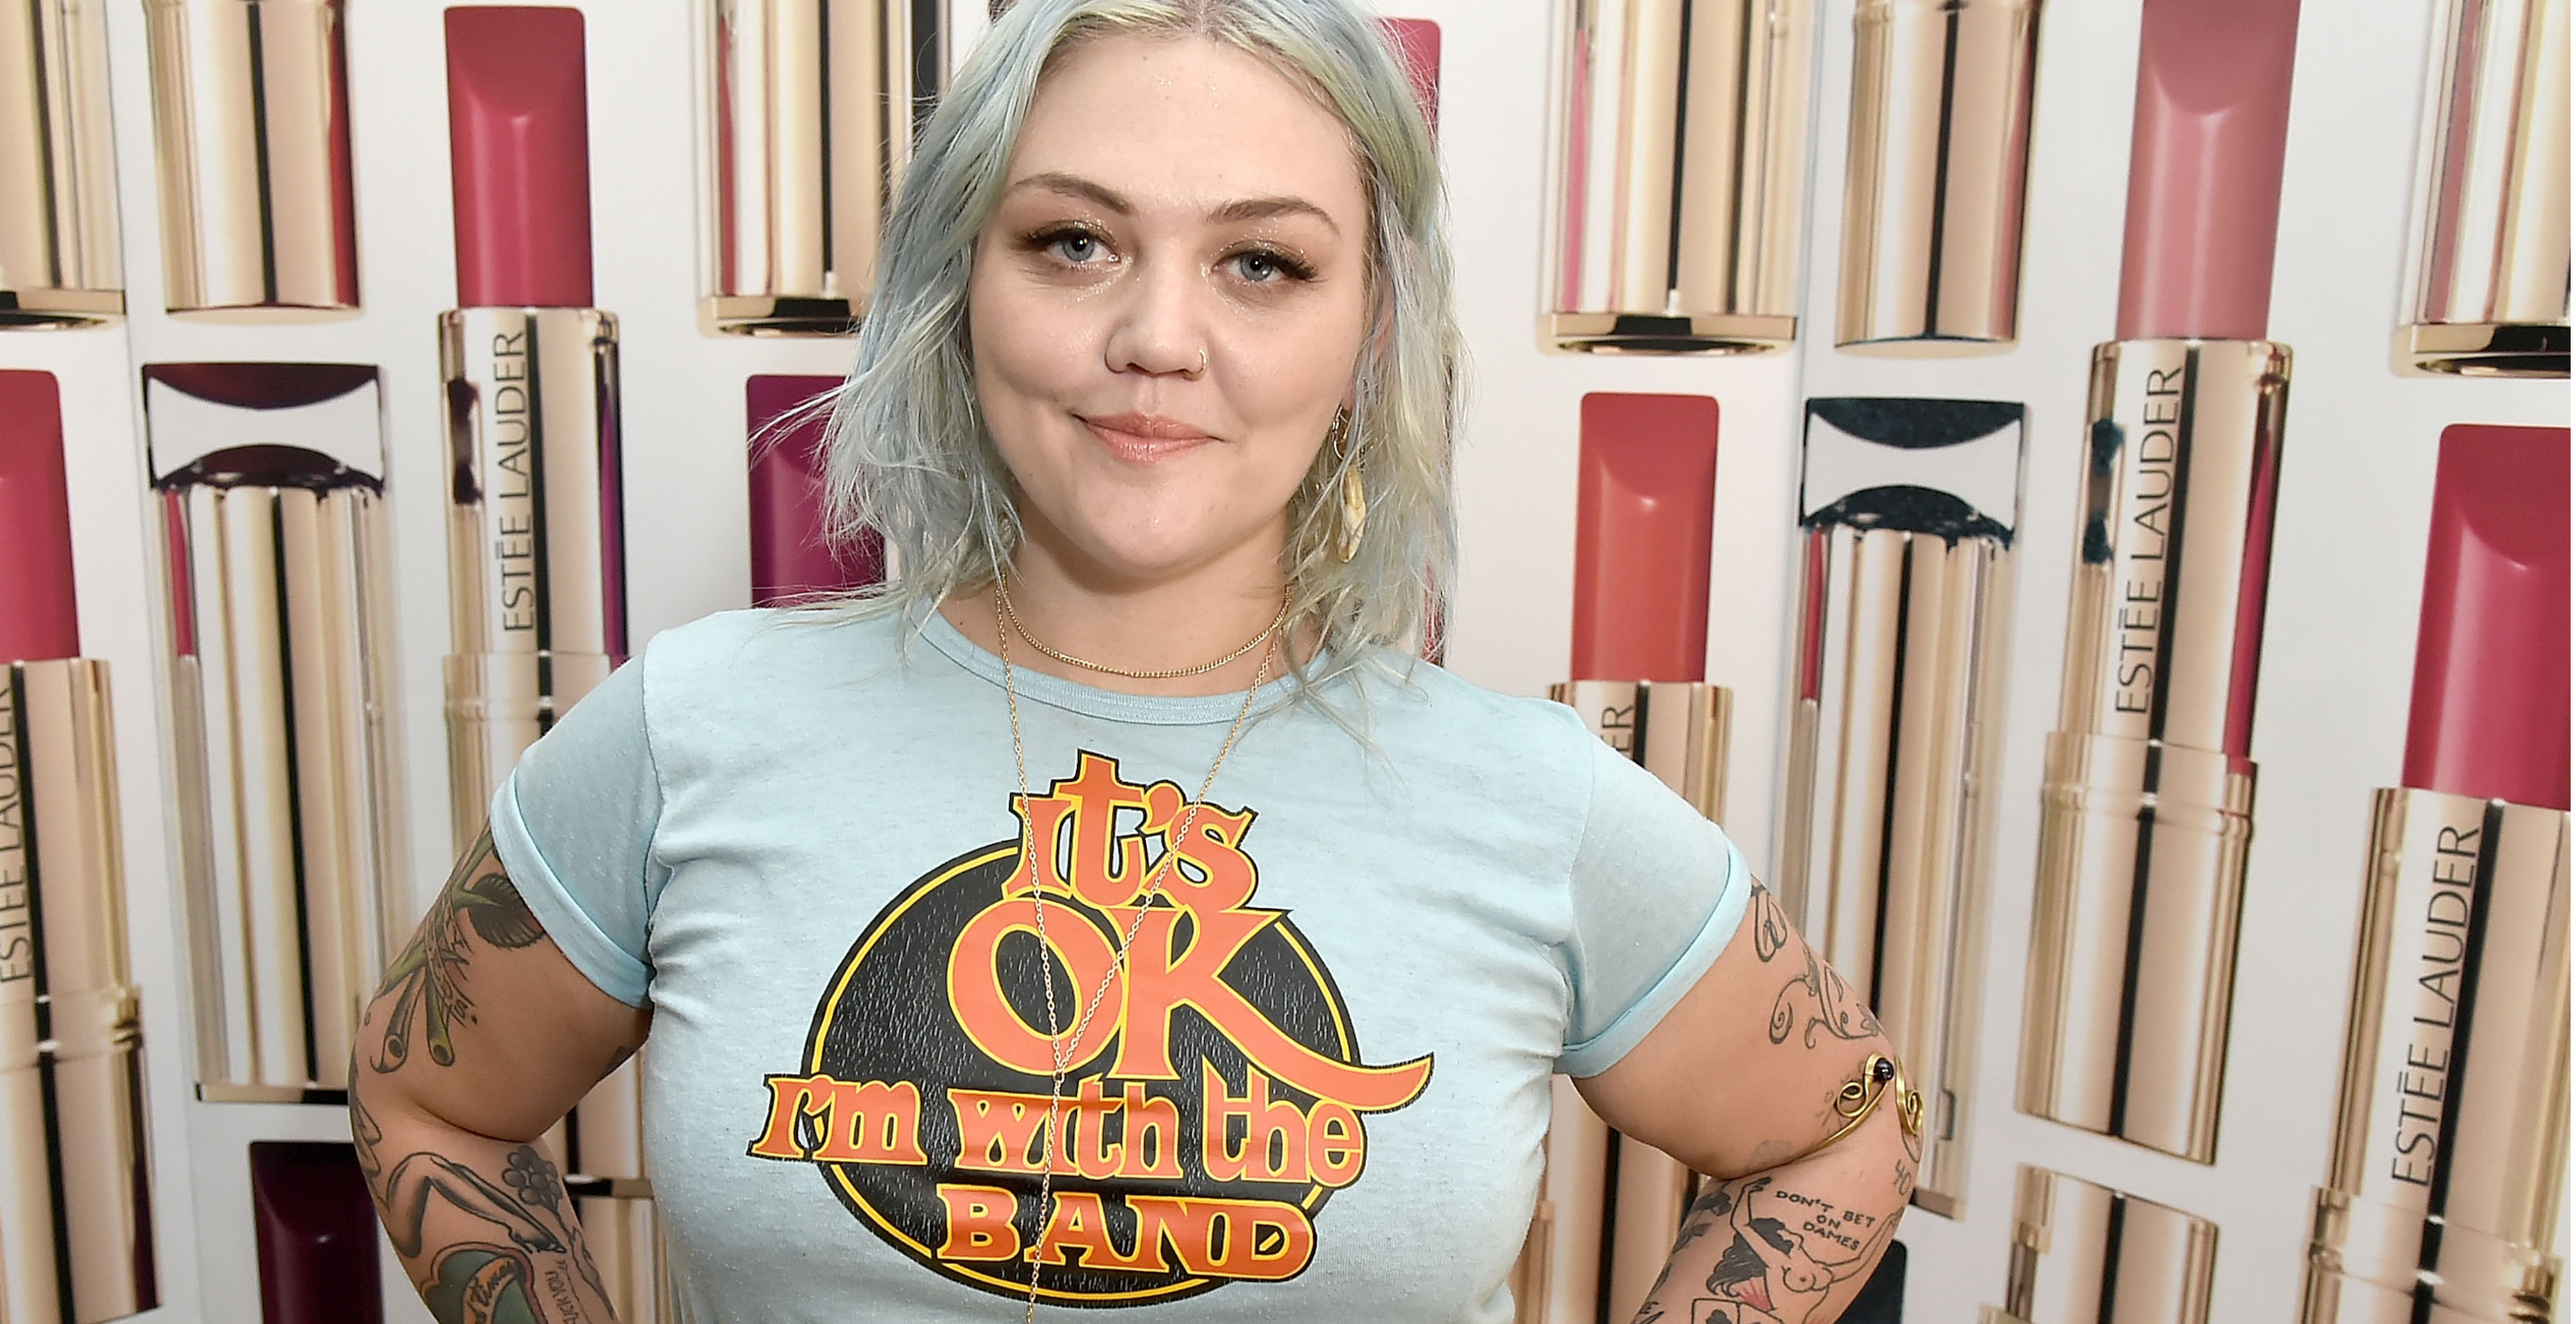 Elle King Says She Received Death Threats And People Told Her To Commit Suicide After Botched Dolly Parton Tribute